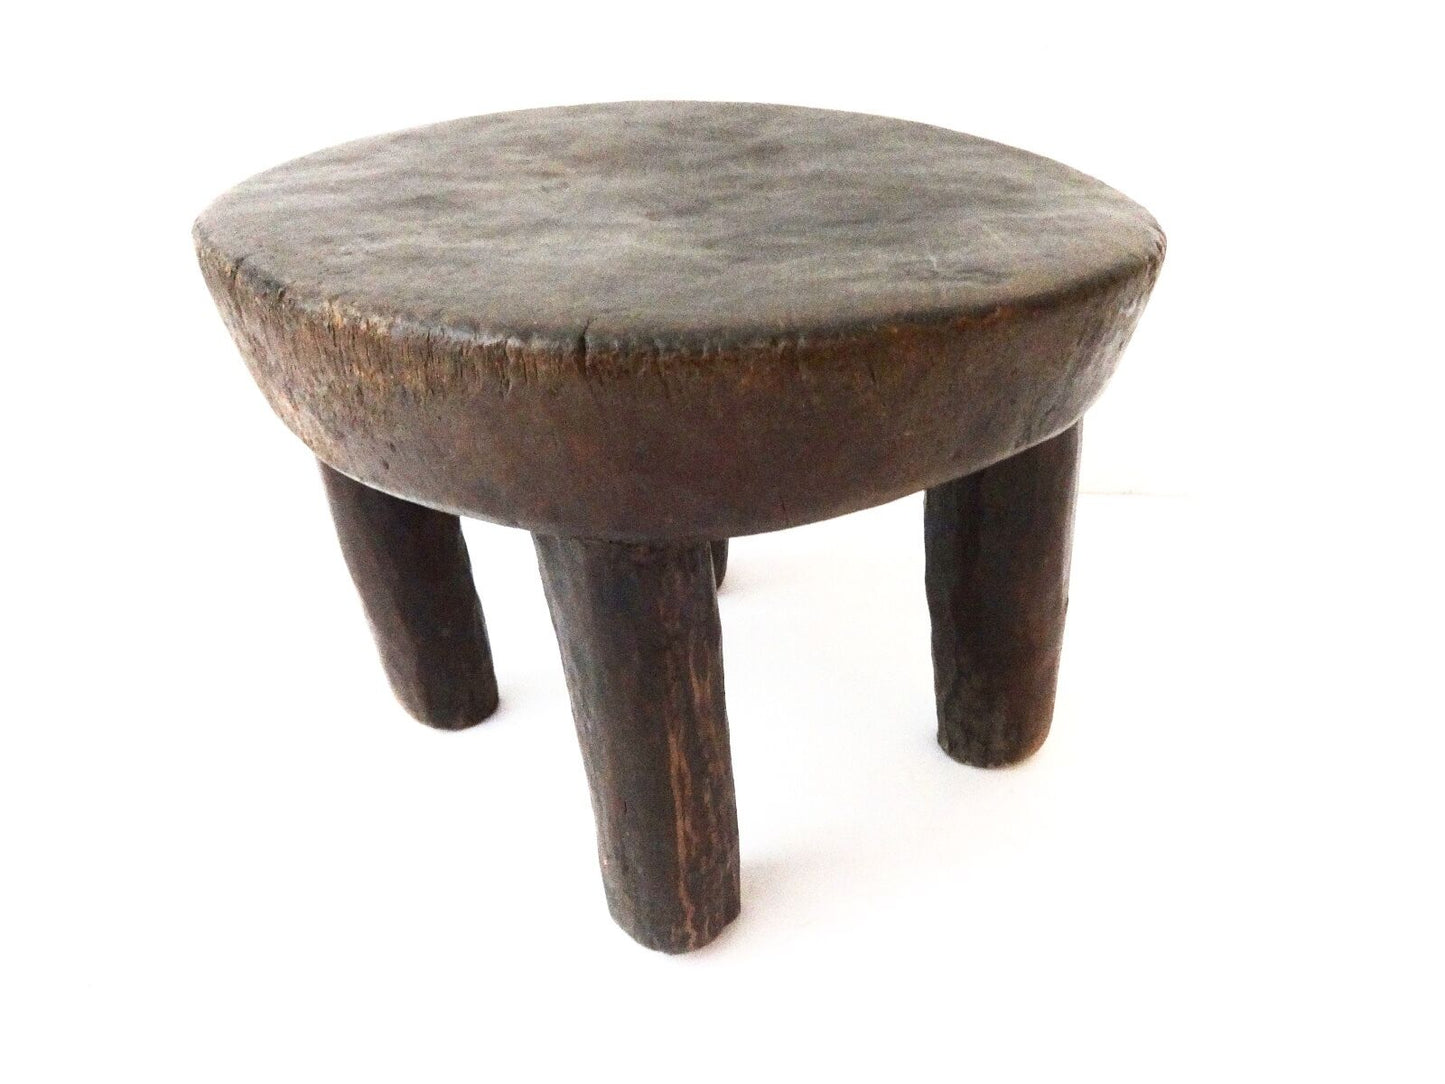 #1658 African Old Carved Wood Milk Stool Hehe Gogo People Tanzania 7.5" H by 10" D